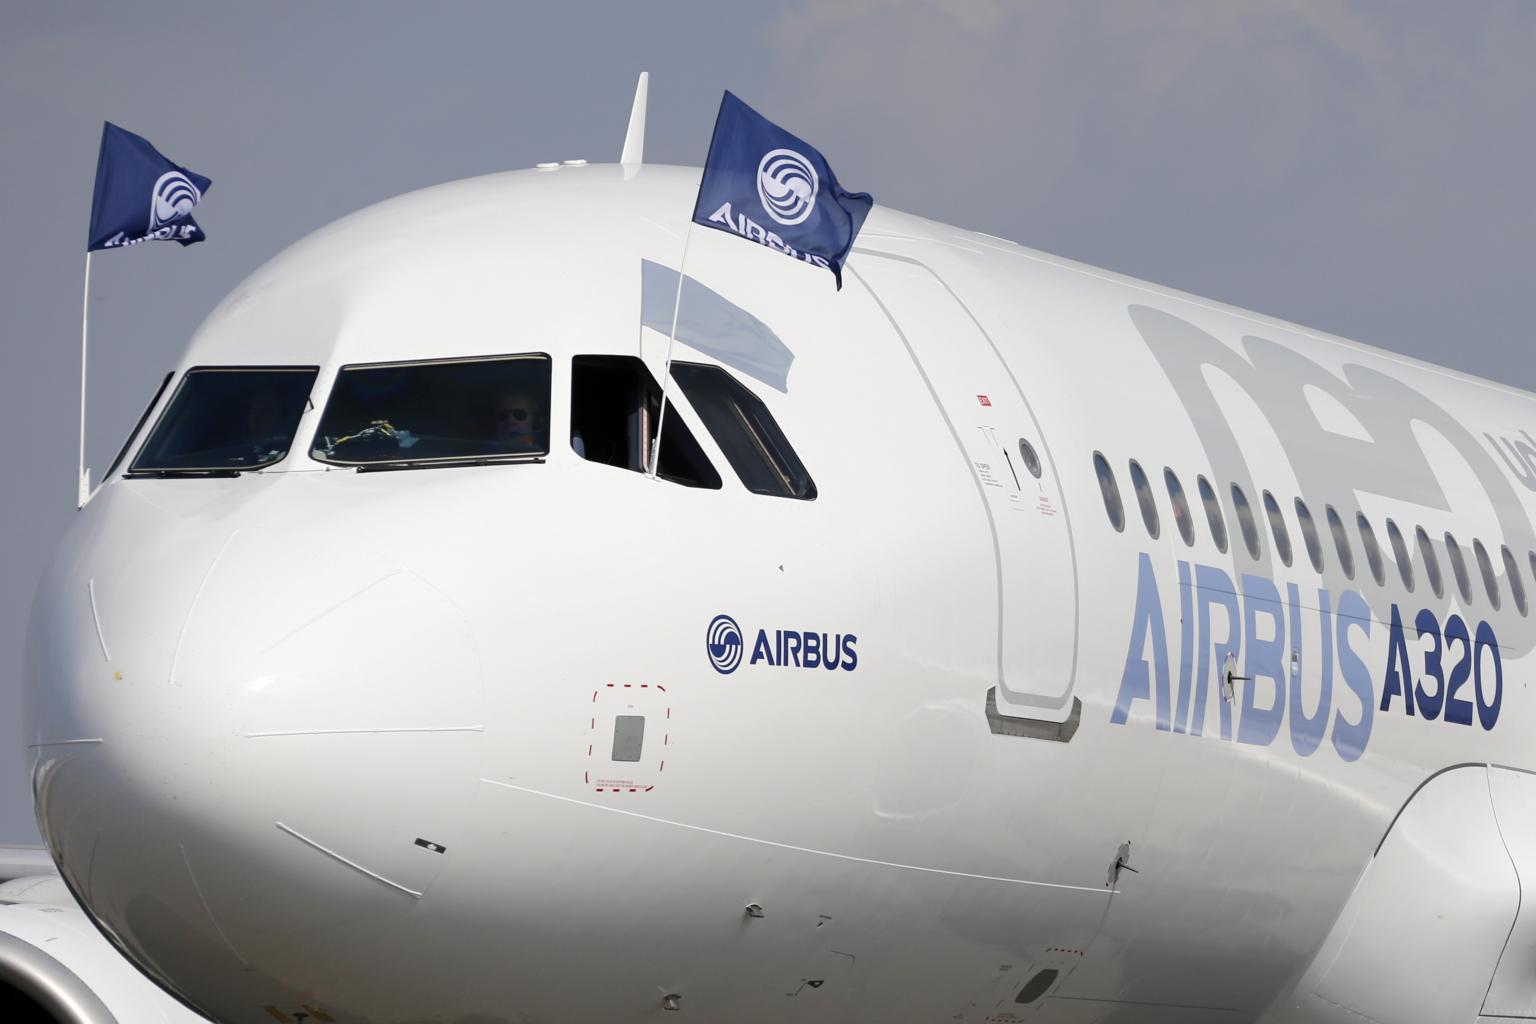 Airbus ended up with an operating loss of 510 million euros last year